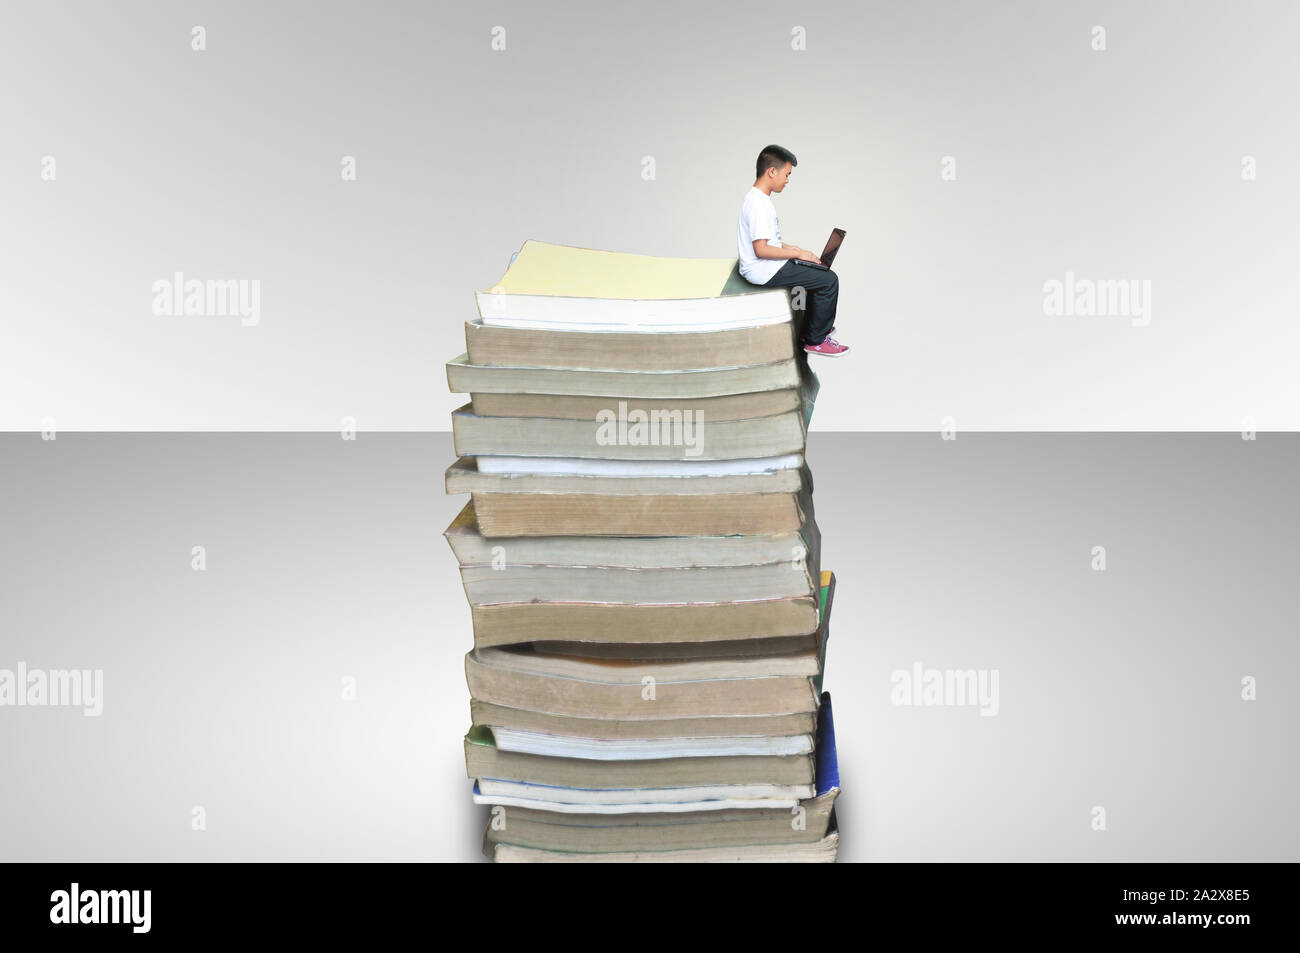 A boy sitting in a tower of books using his laptop in a white / gray background showing that the student had read many book and he is learning. Stock Photo